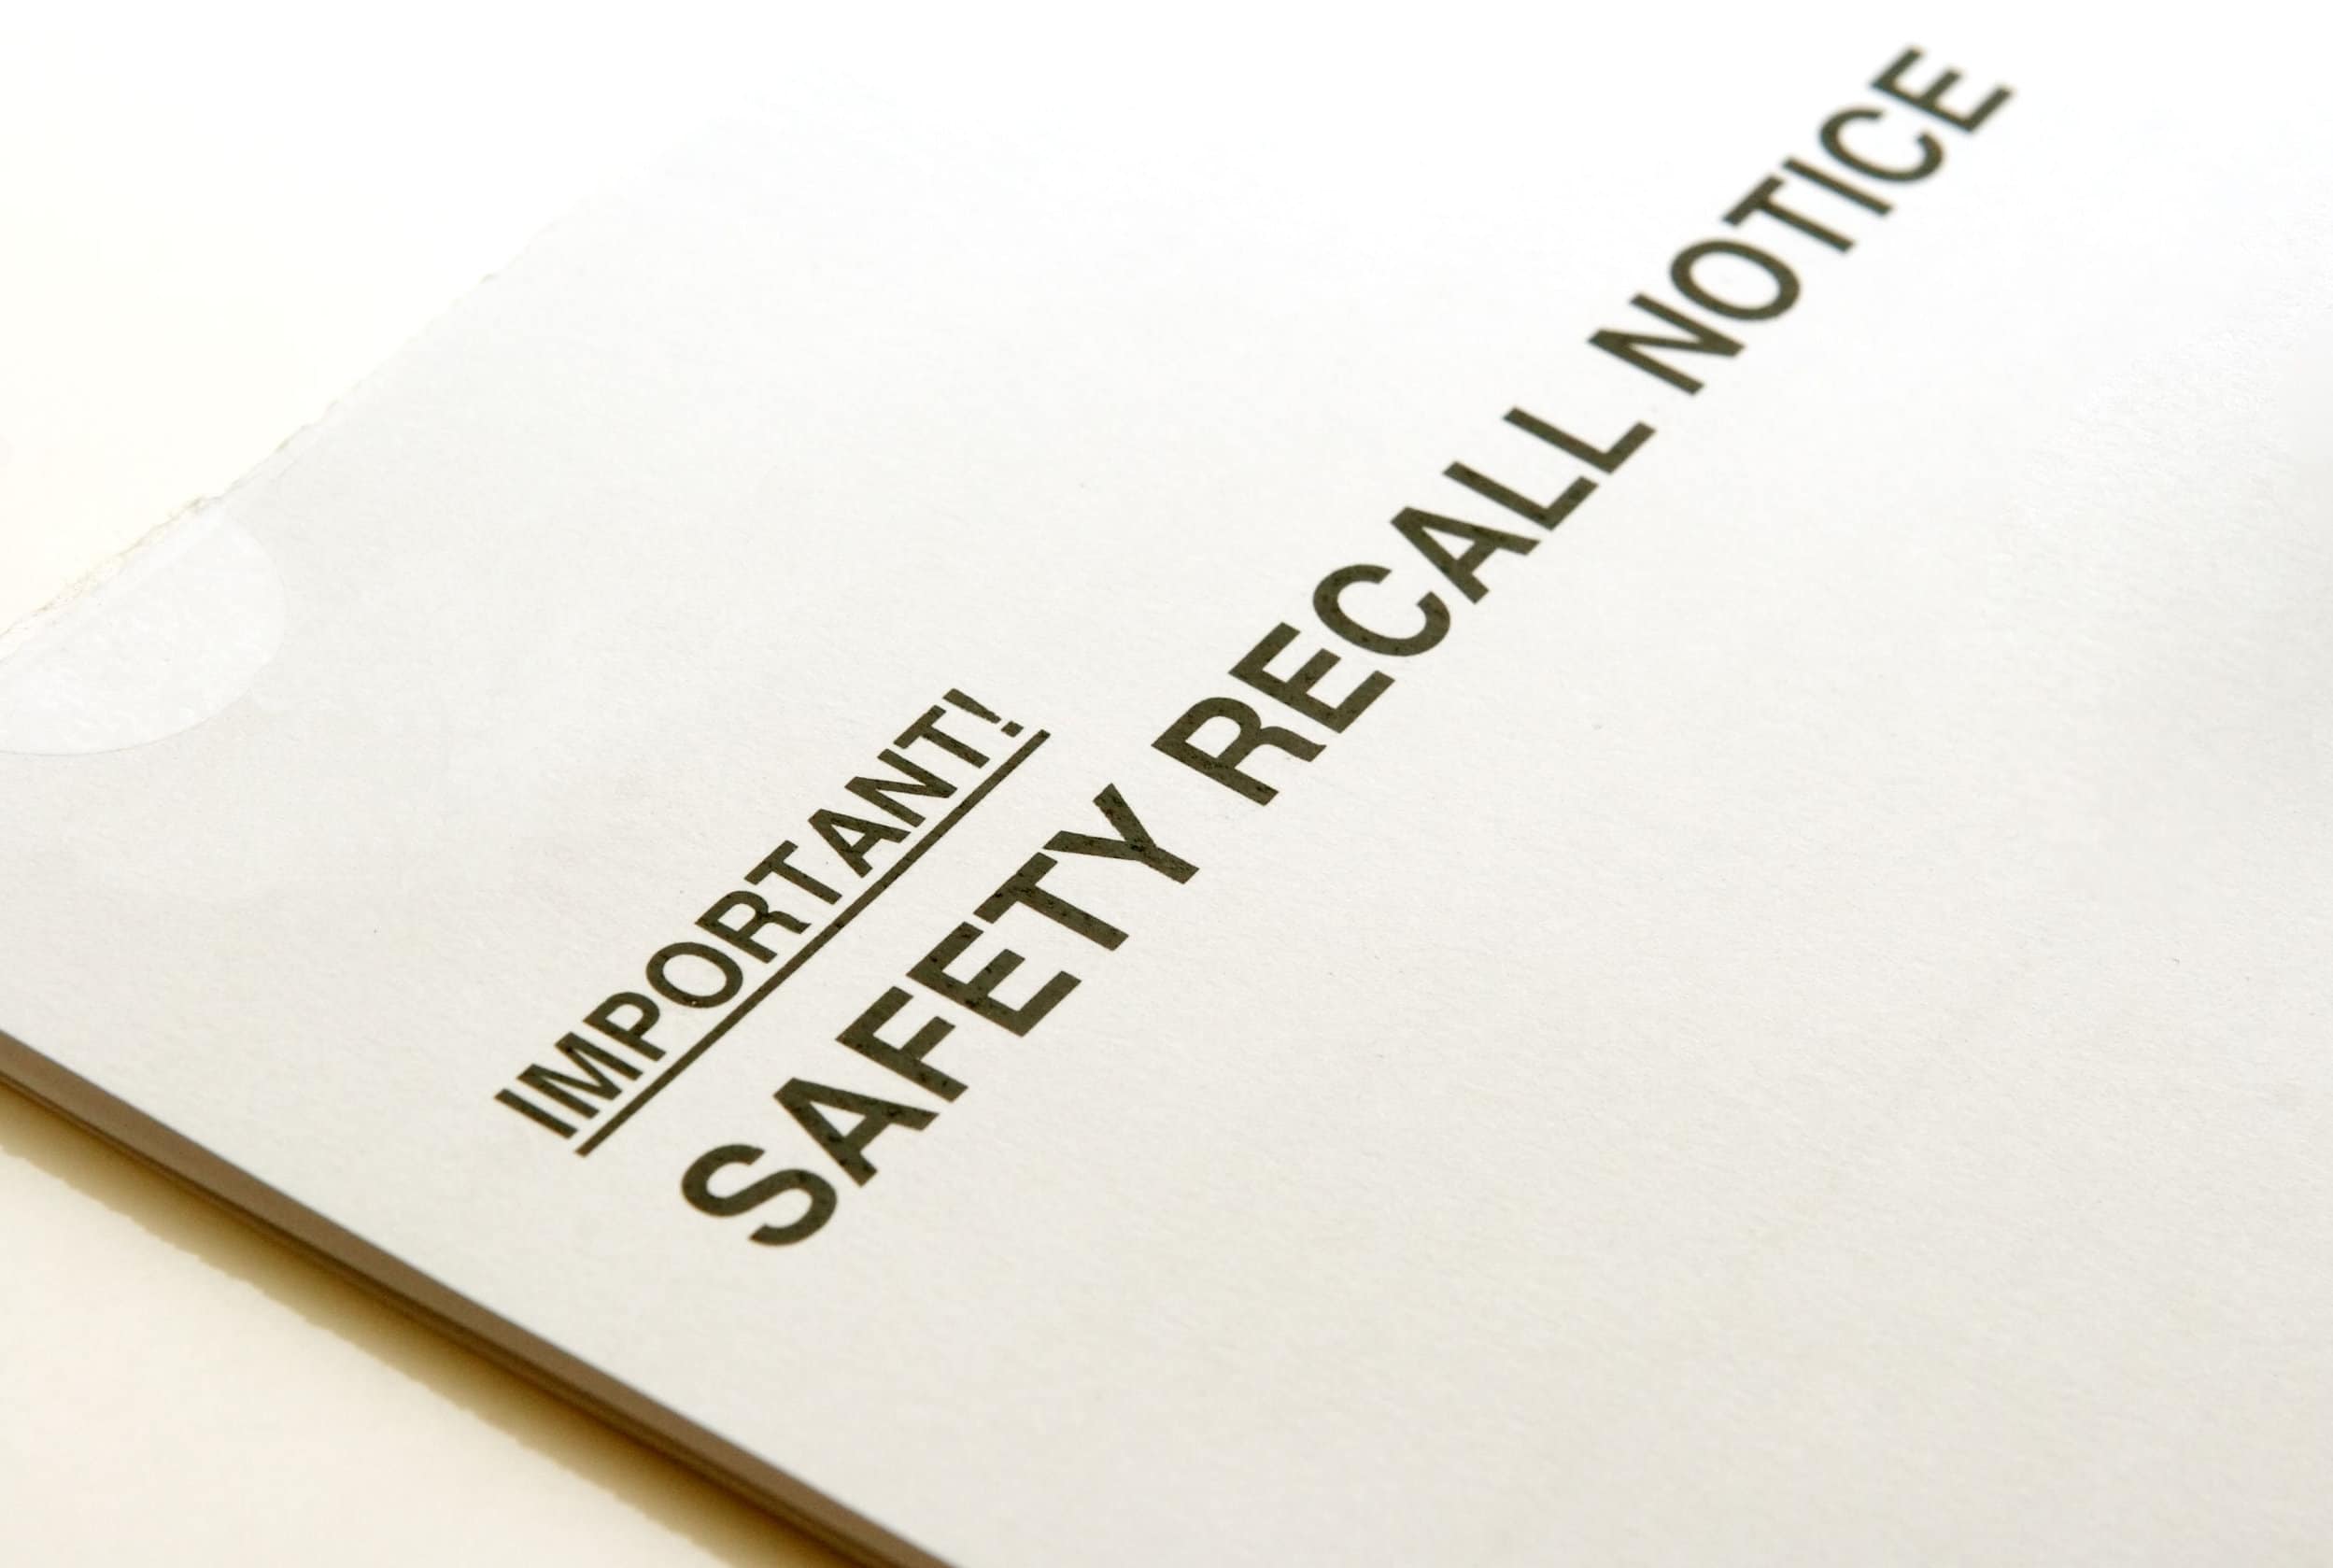 Product Liability: What Happens If You're Hurt by a Recalled Product?